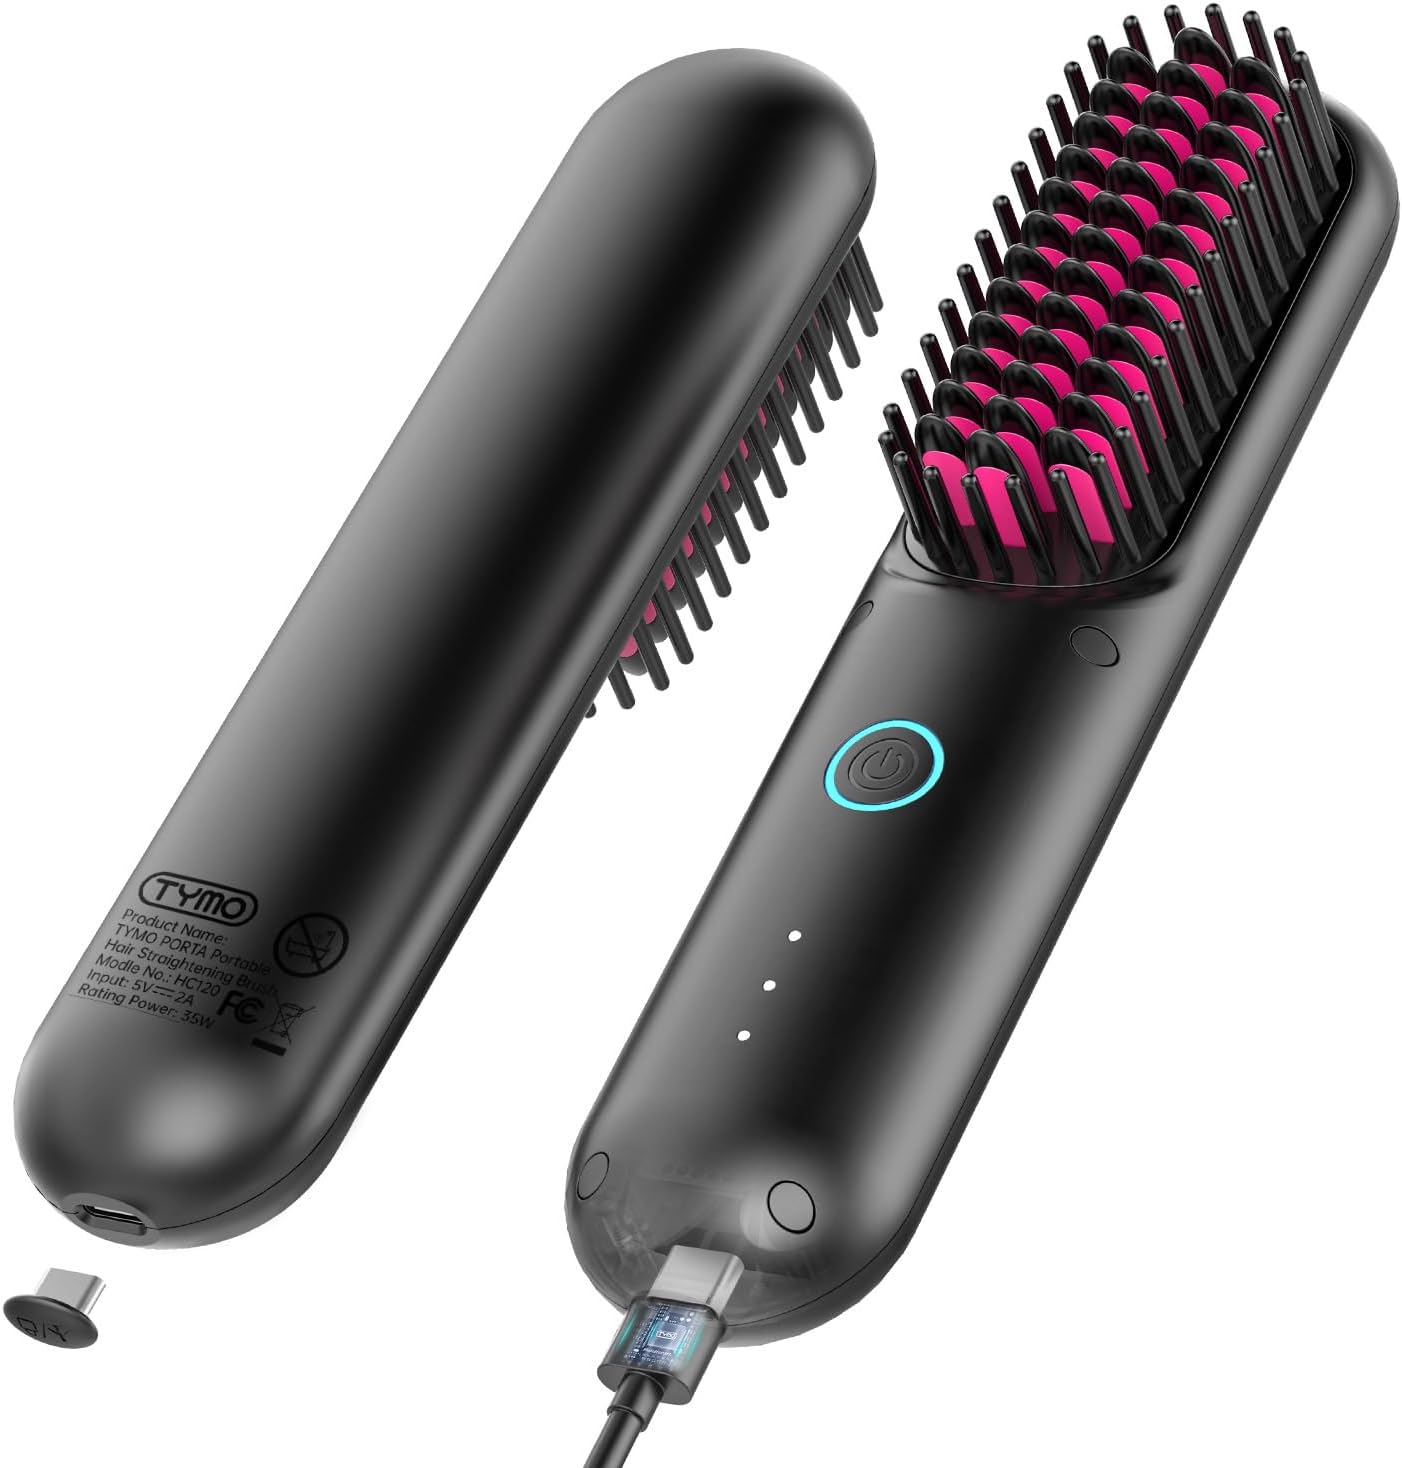 TYMO Porta Cordless Hair Straightener Brush, Portable Mini Straightening Brush for Travel, Negative Ion Hot Comb Hair Straightener for Women, Lightweight to Carry Out, USB Rechargeable, Anti-Scald